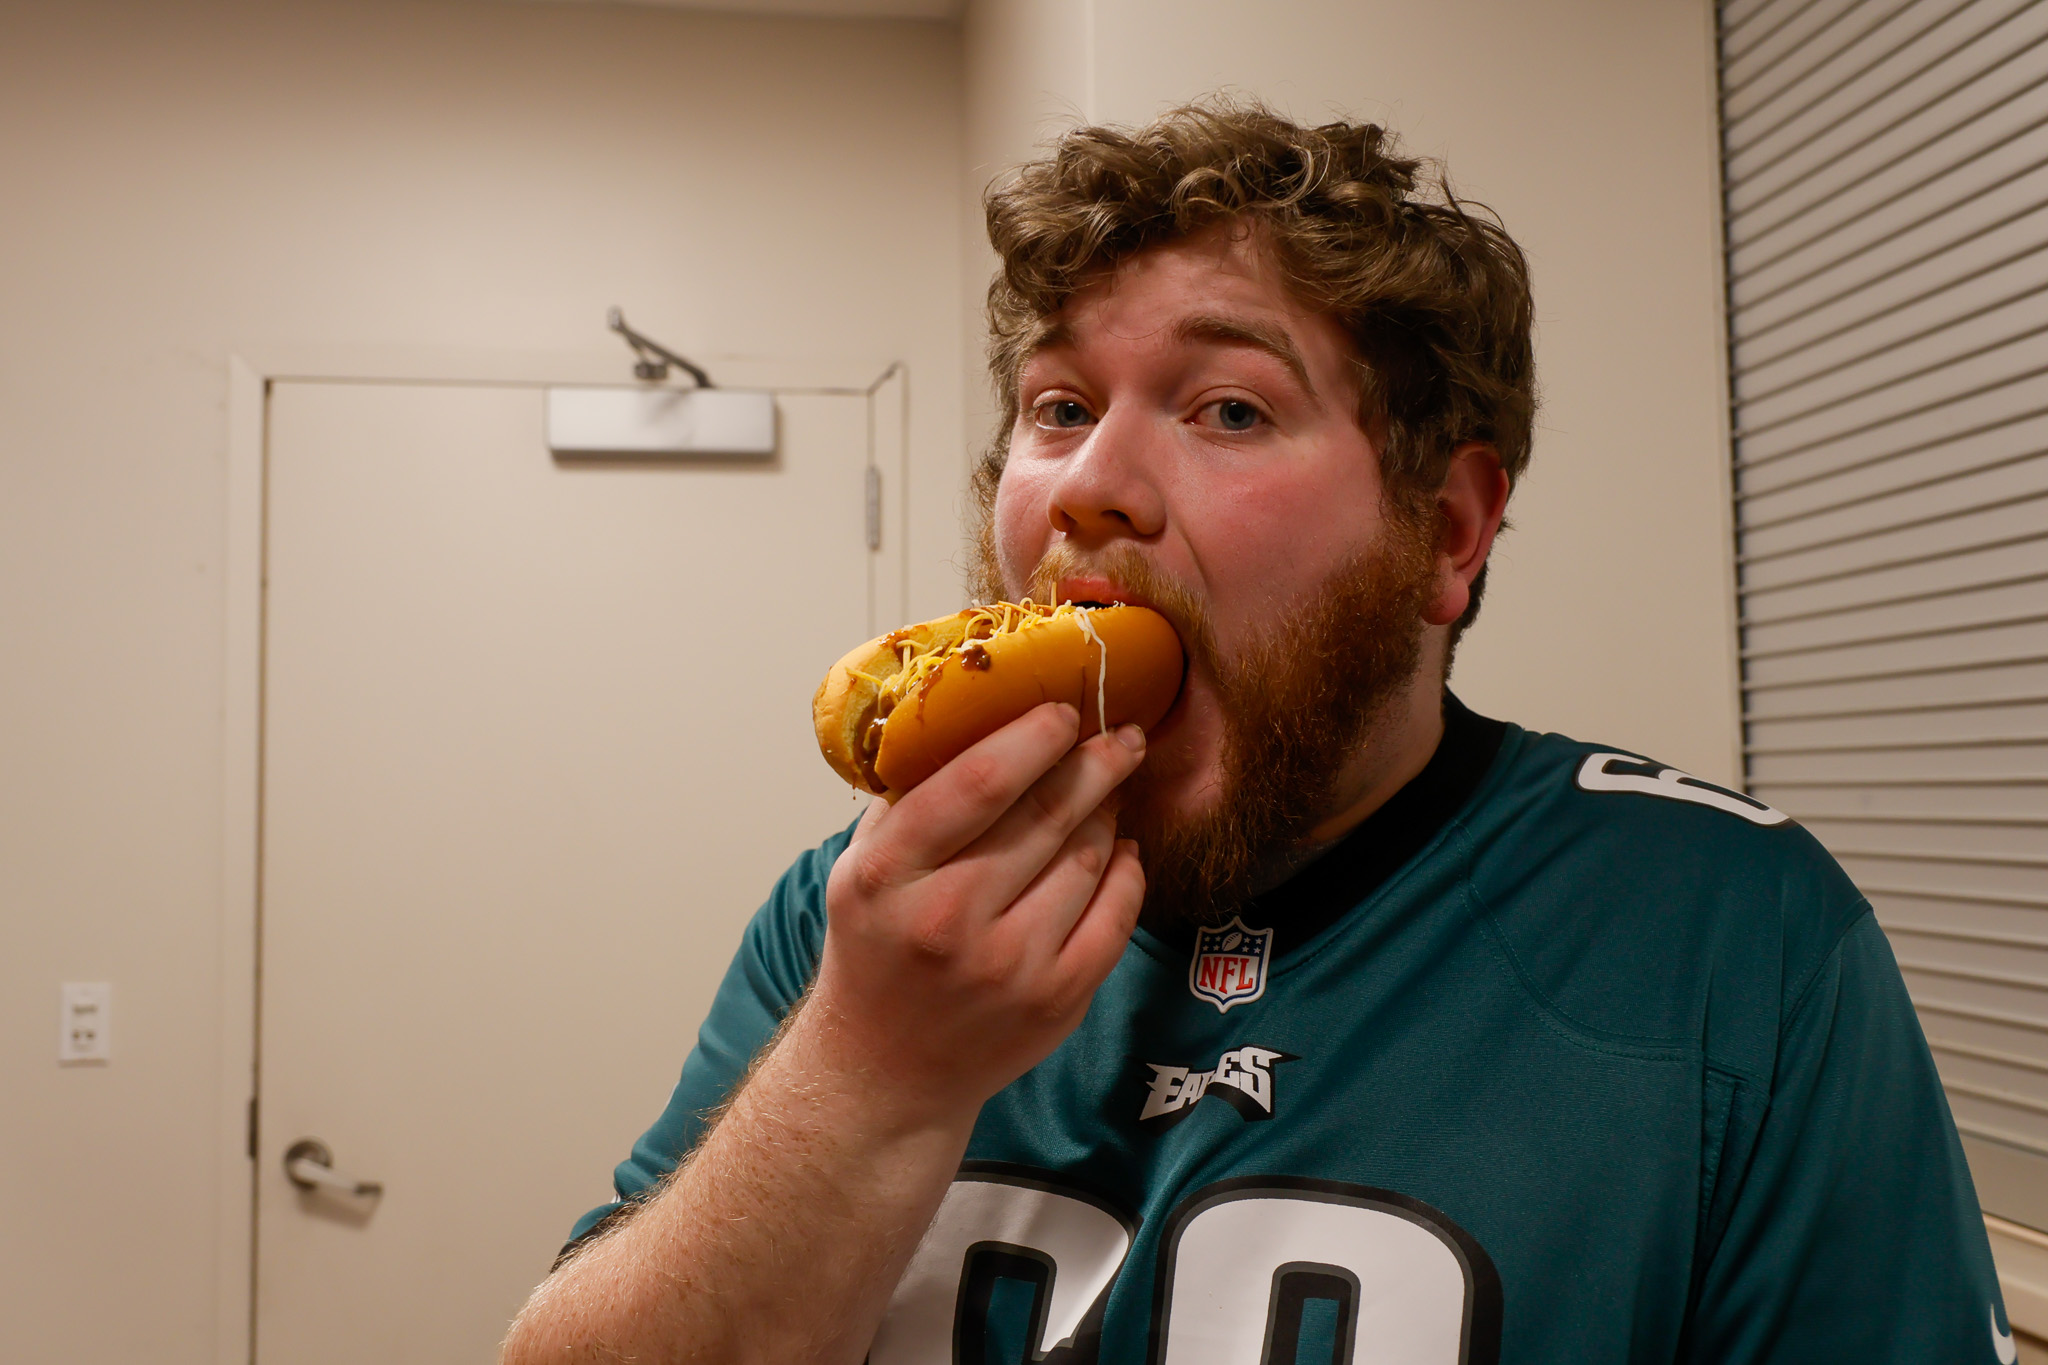 The only appropriate way to eat a hot dog: in an Eagles jersey.
Sal DiMaggio | The Montclarion